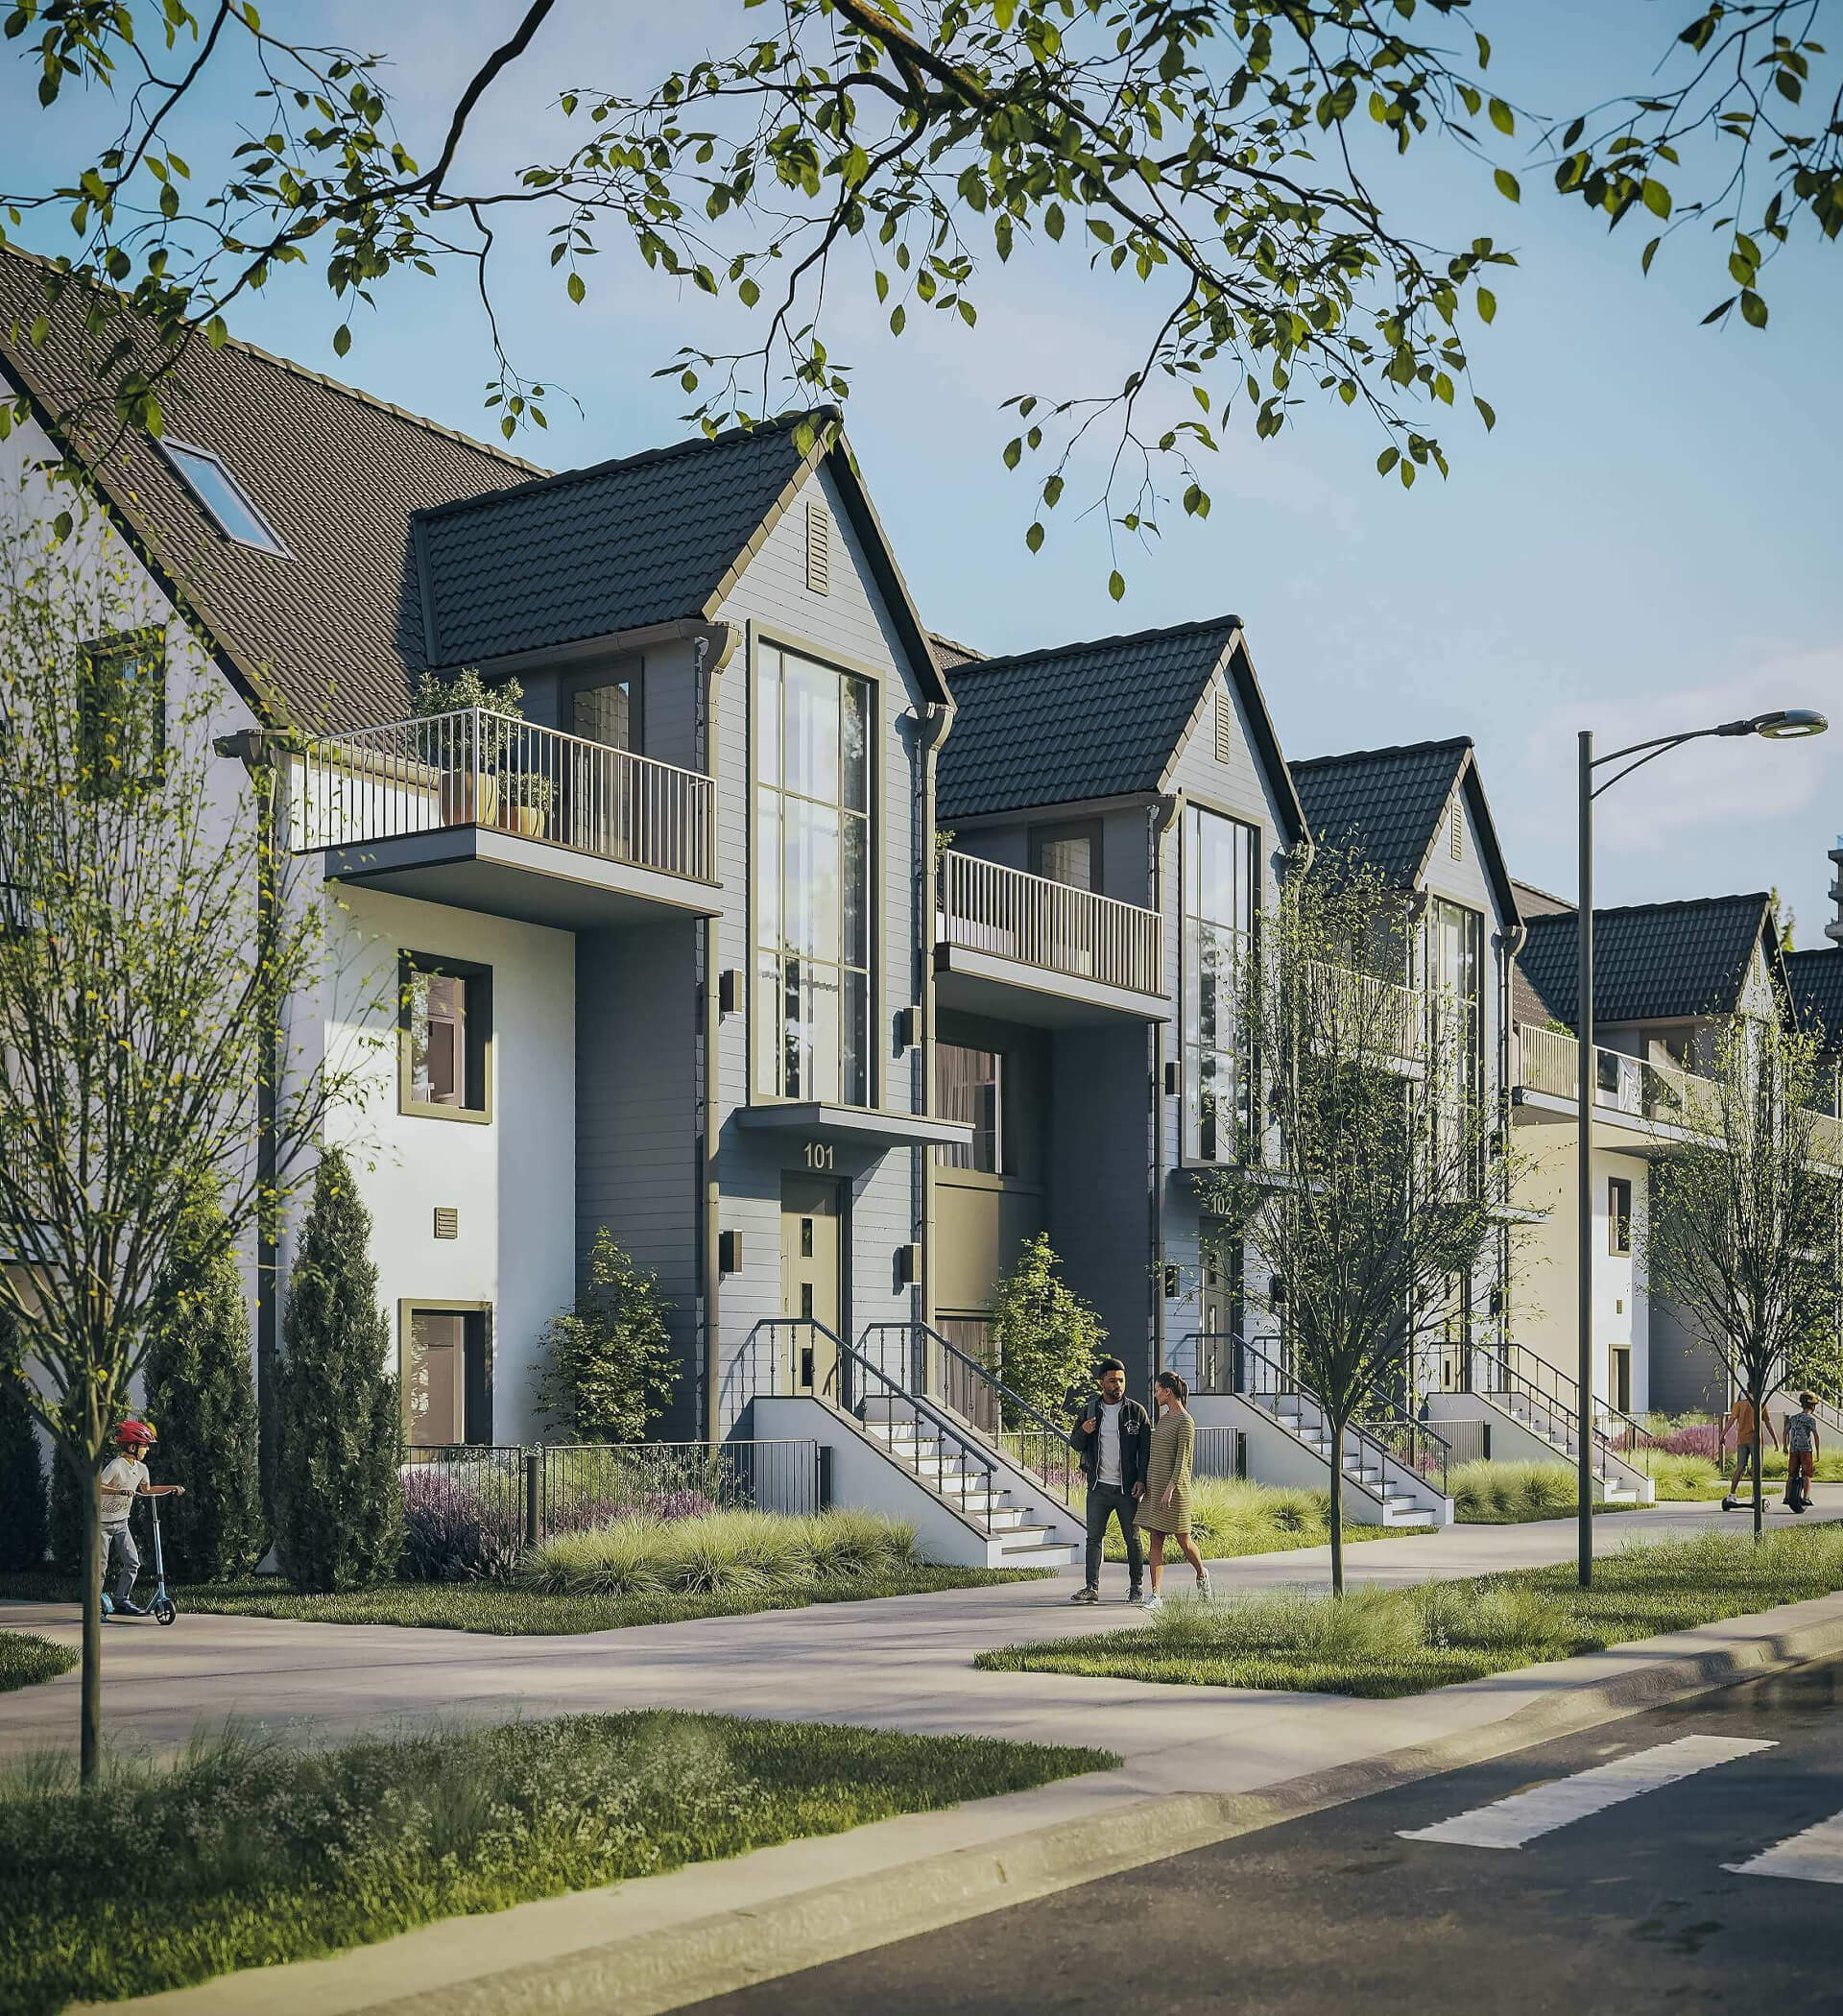 3D Rendering for Townhomes Development